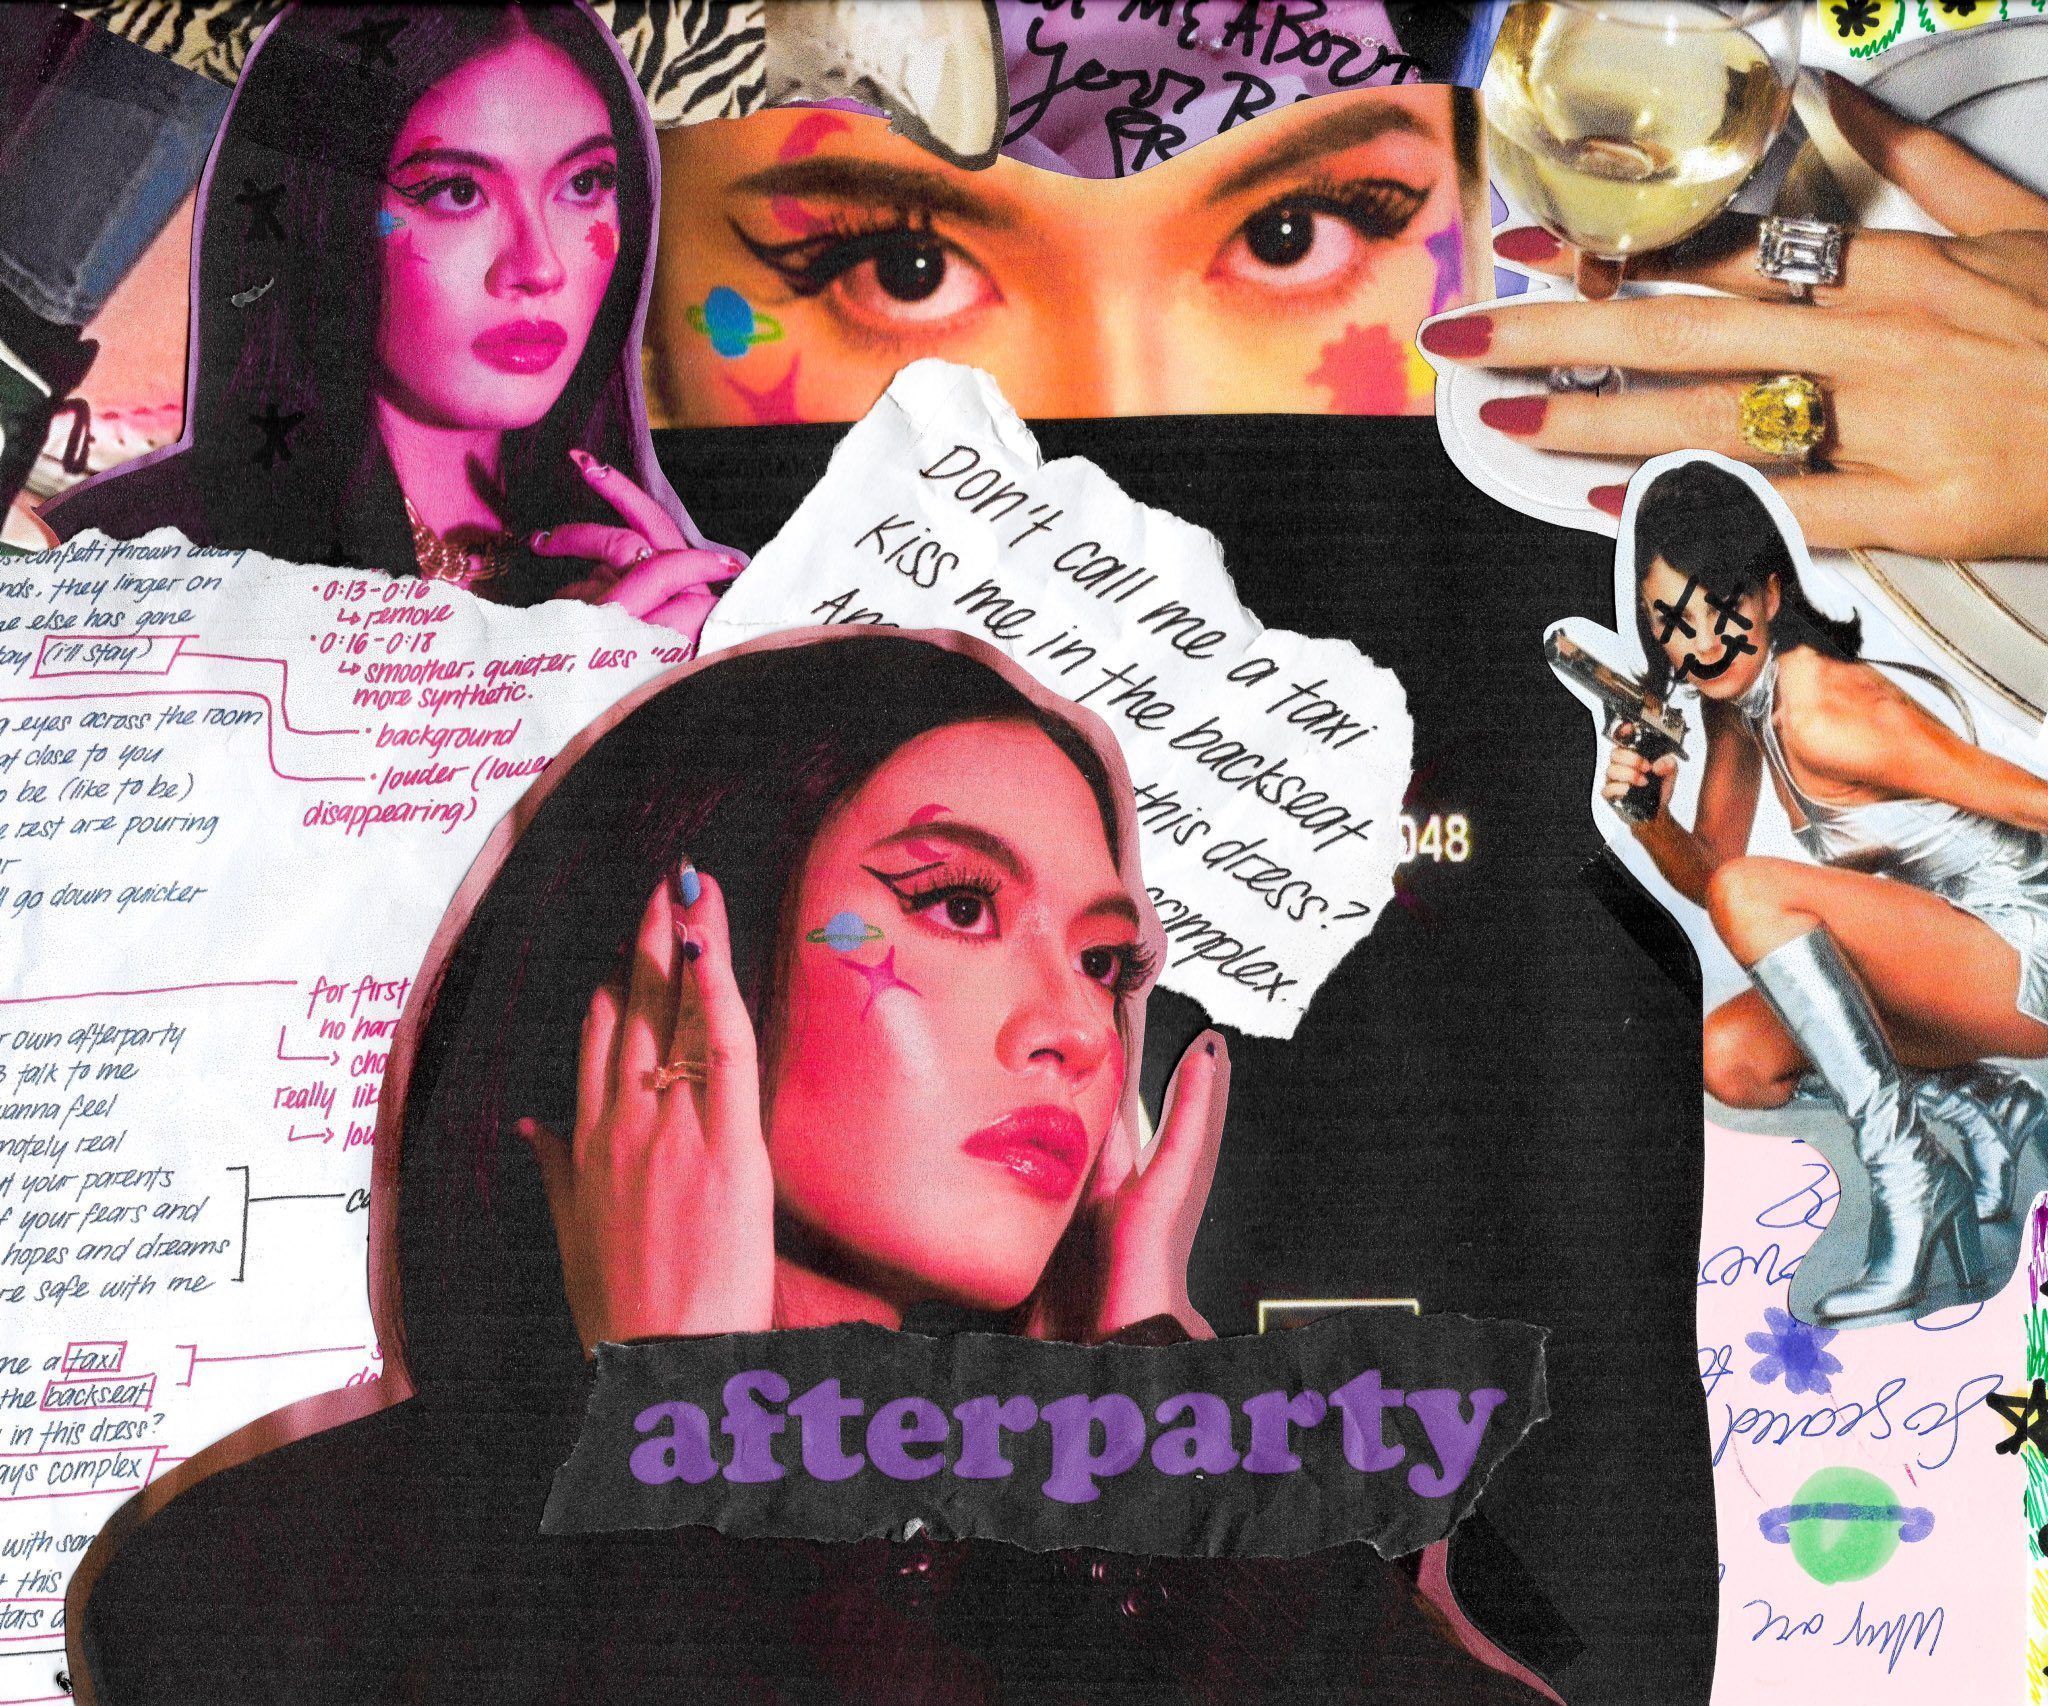 LISTEN: Kakie Pangilinan ends 2020 with new song, 'afterparty'